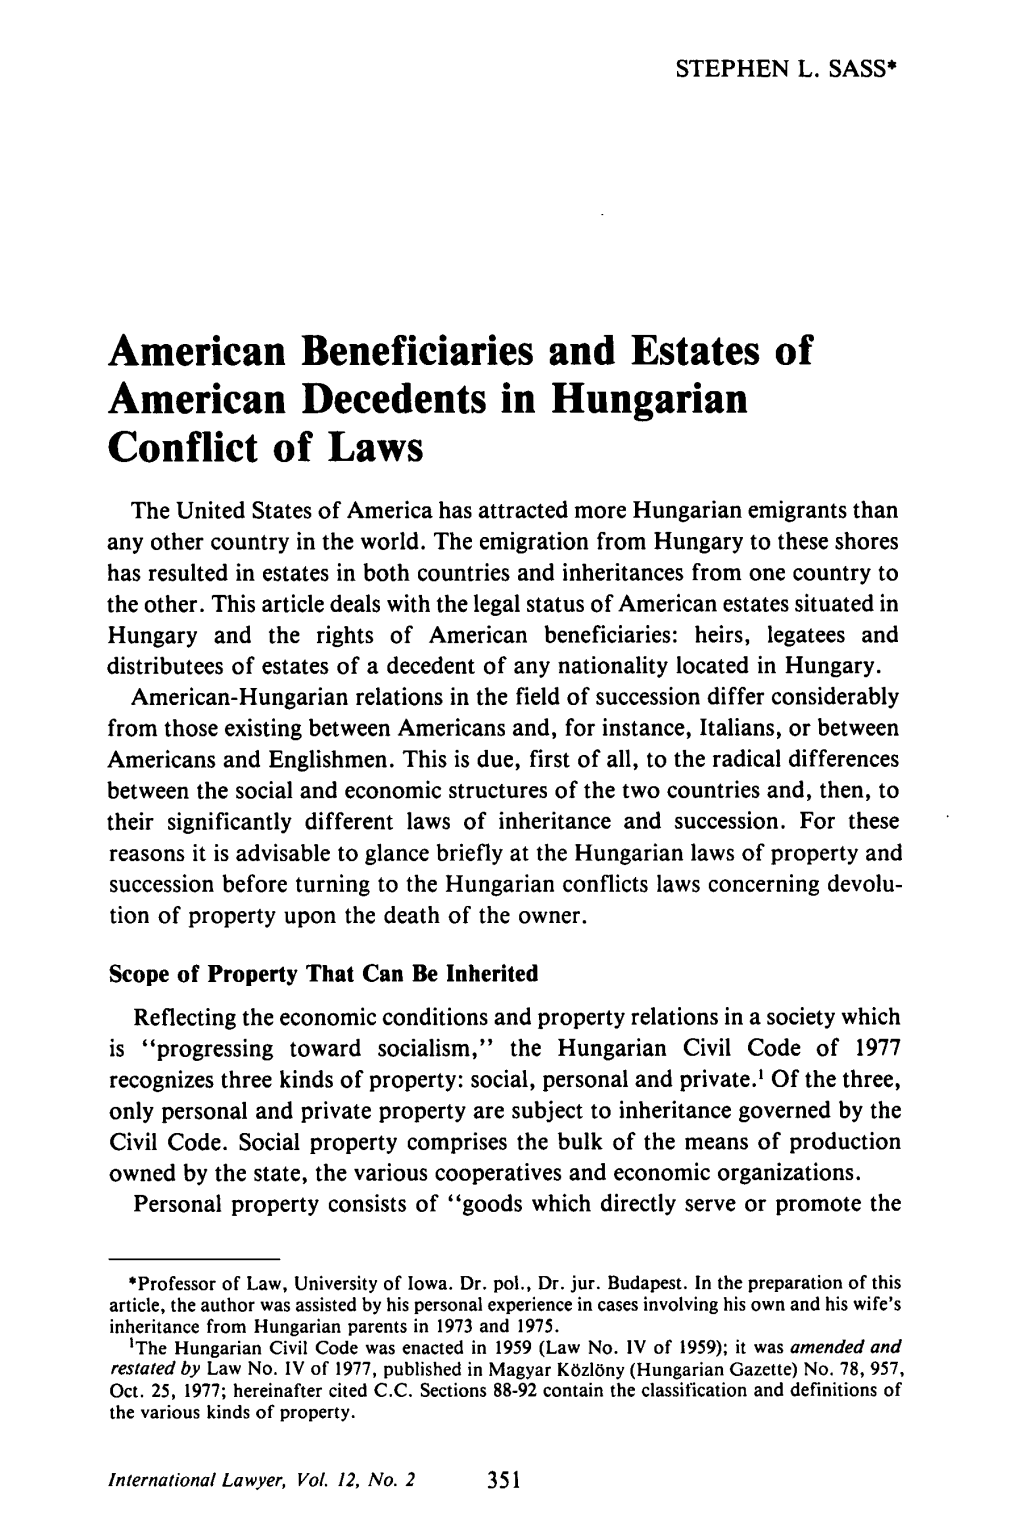 American Beneficiaries and Estates of American Decedents in Hungarian Conflict of Laws